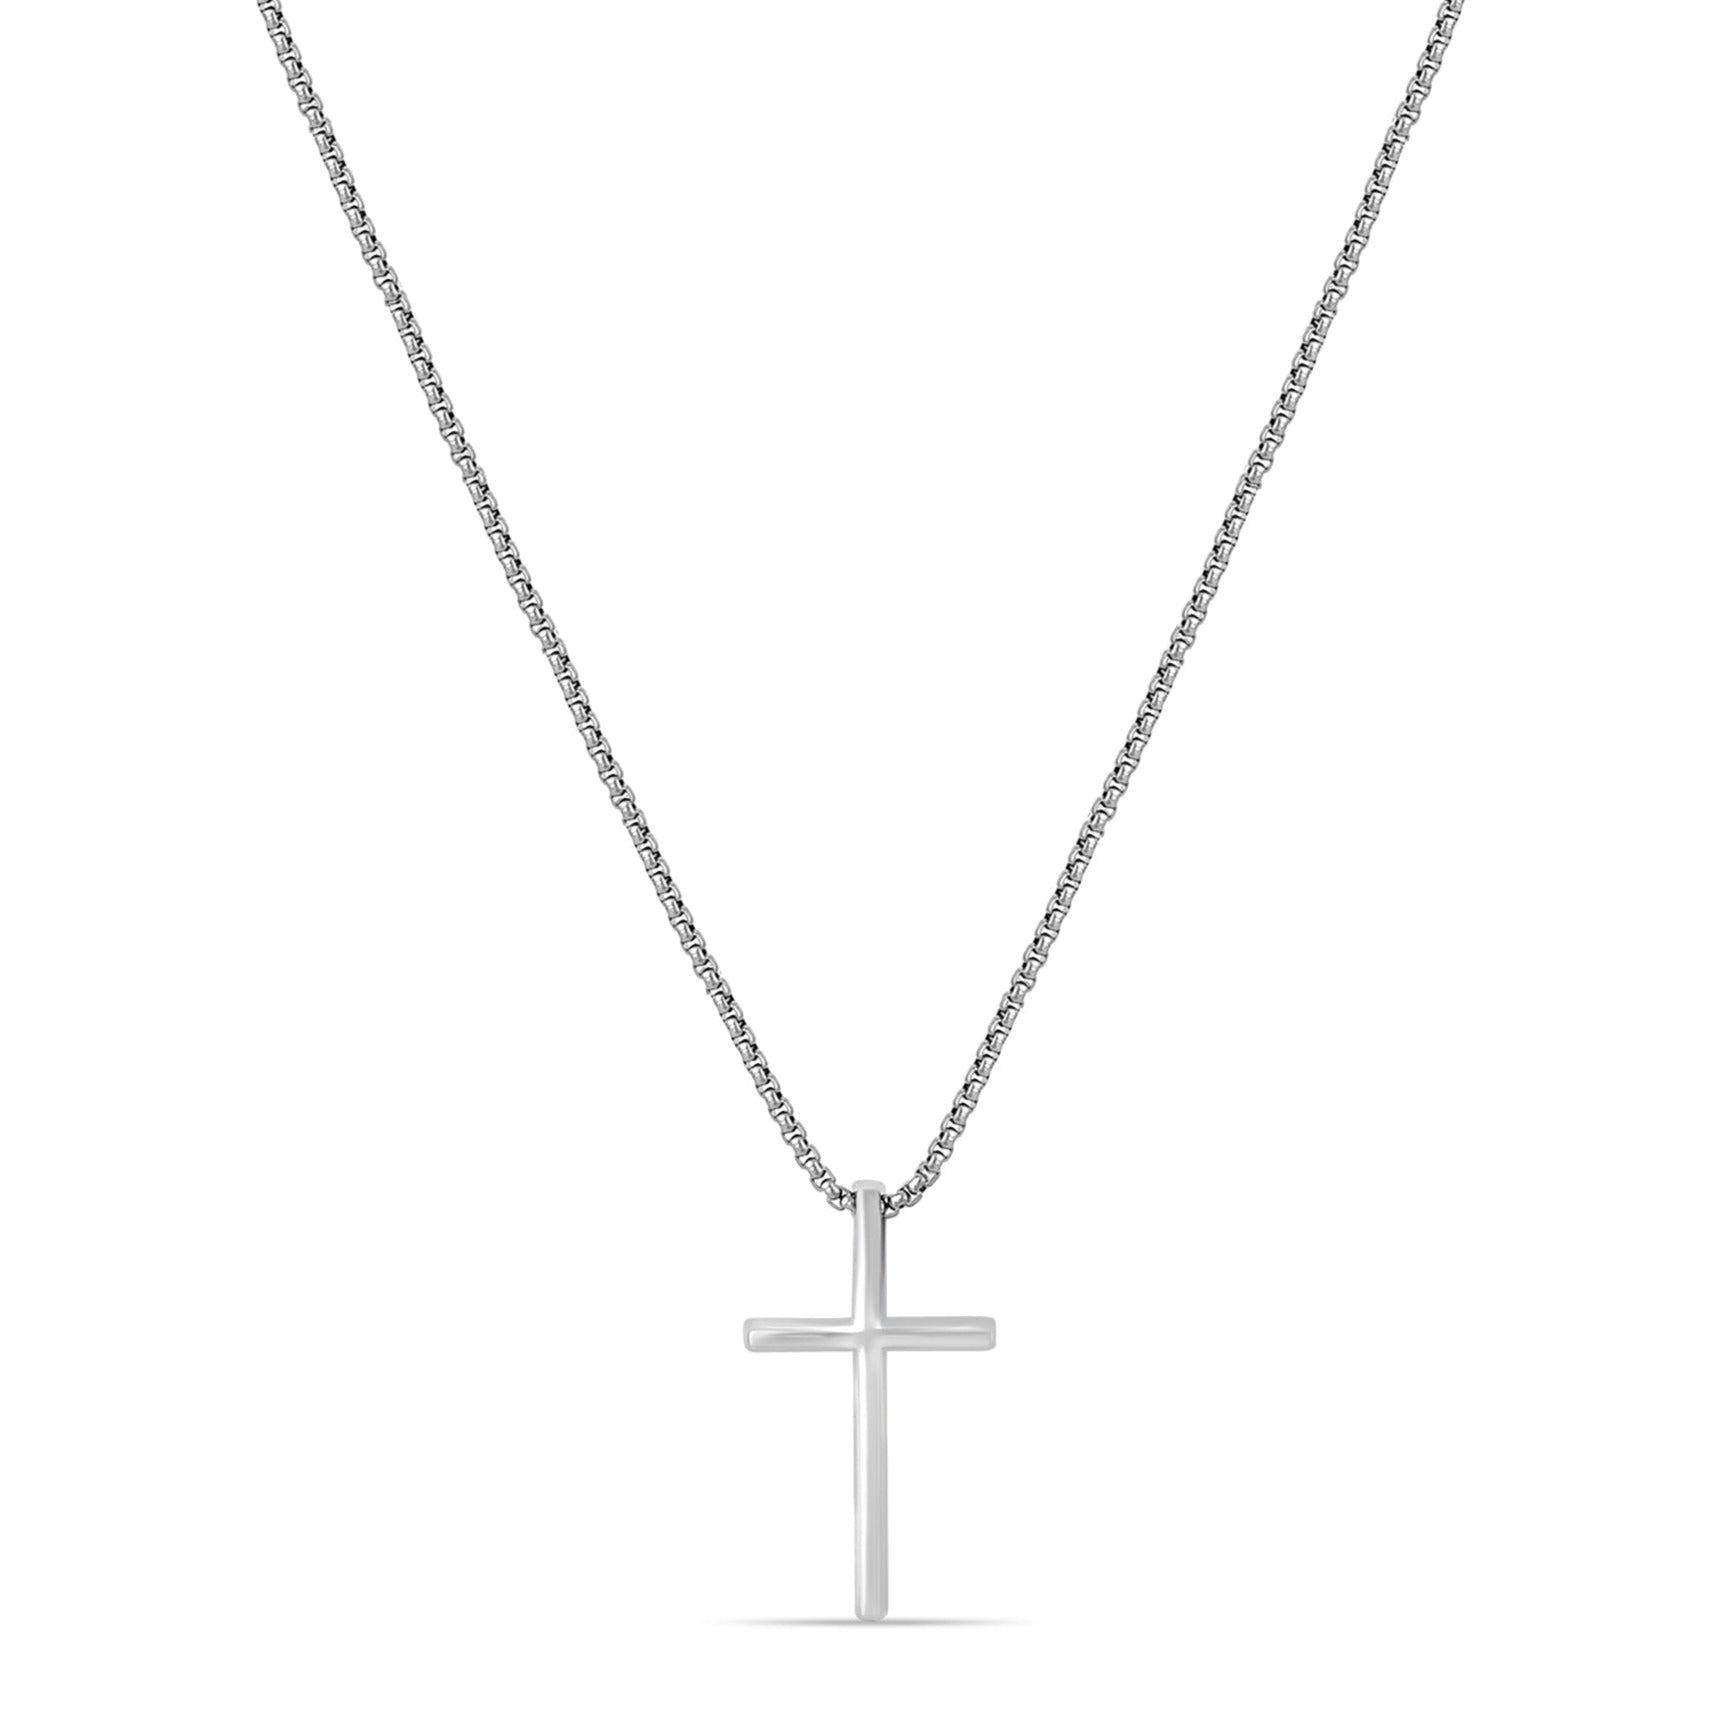 The Cross Pendant - Fab Couture